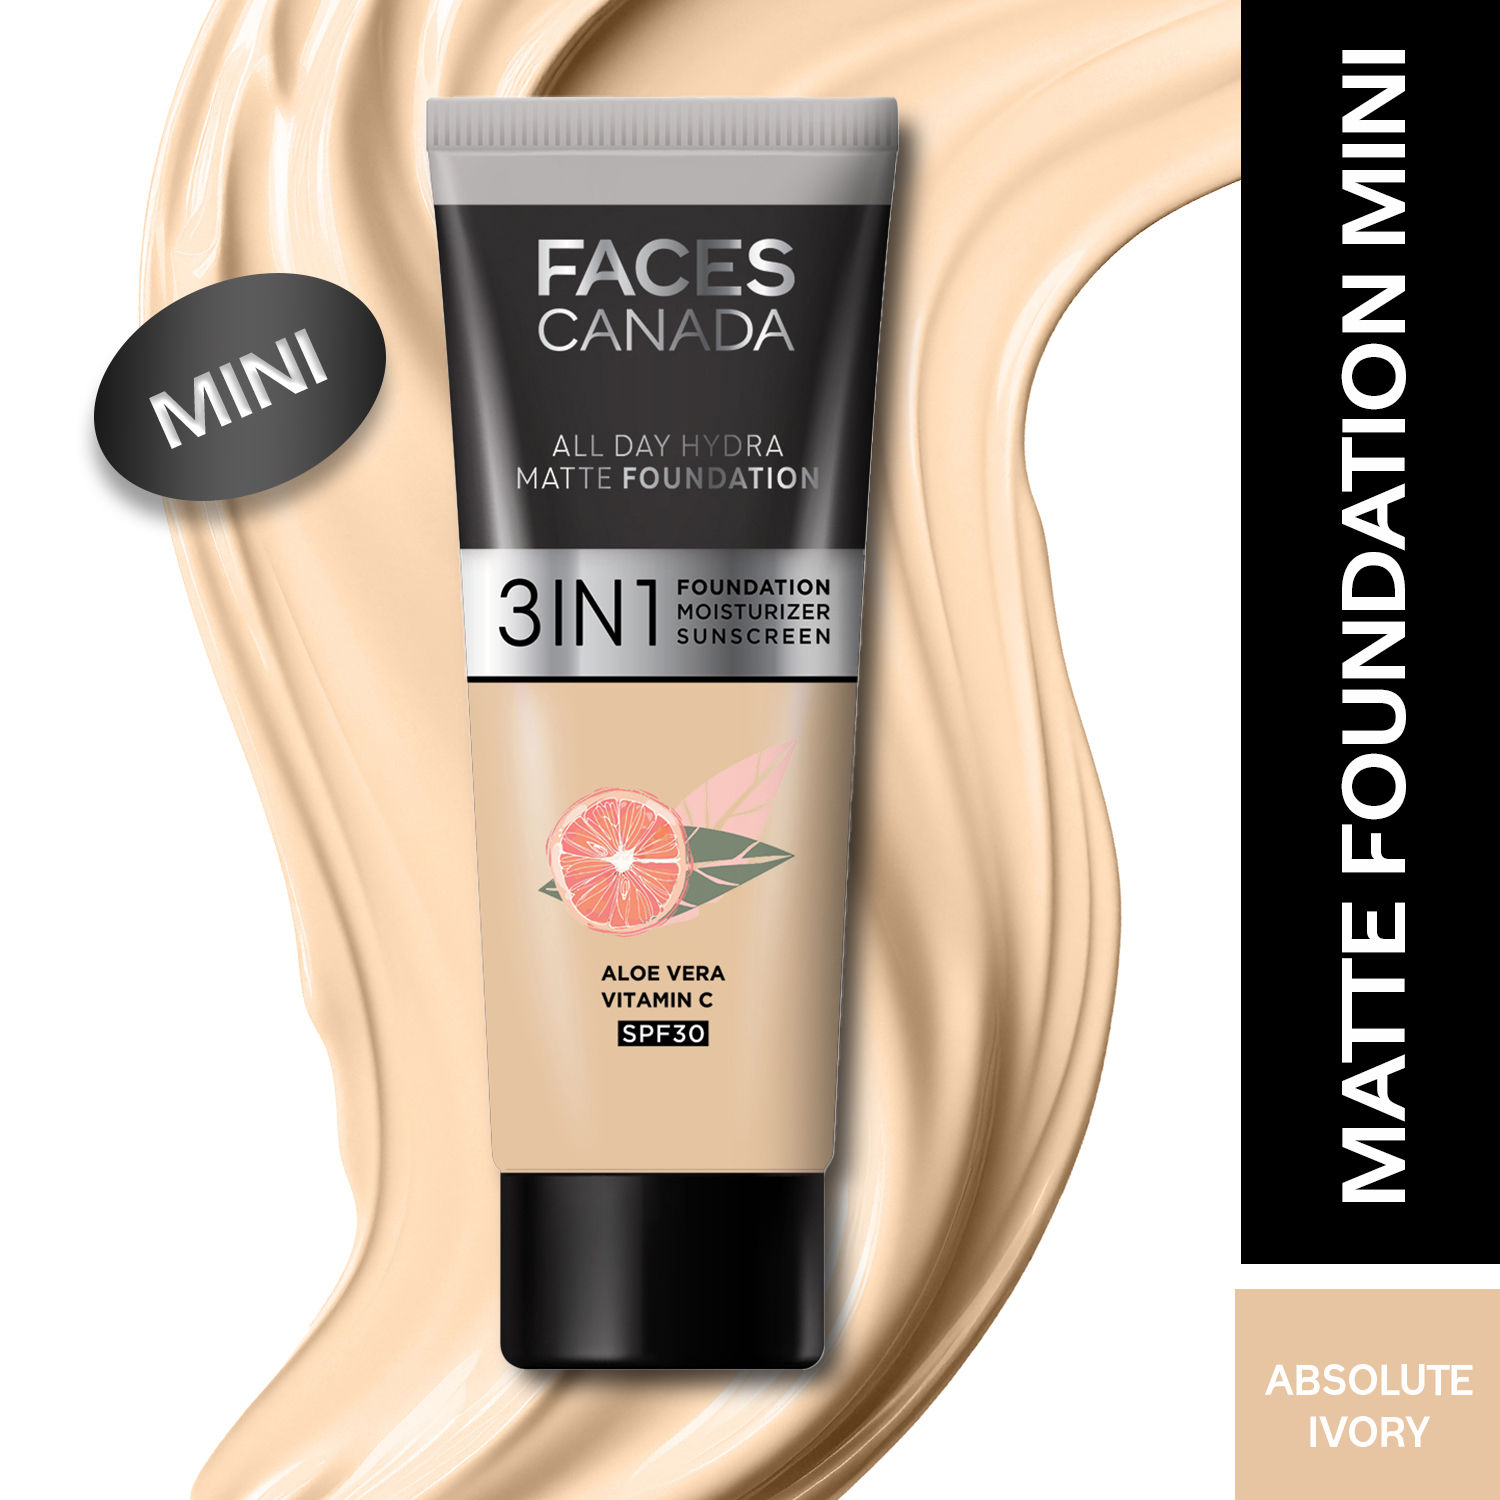 FACES CANADA All Day Hydra Matte Foundation Absolute Ivory 012 15ml | SPF  30 | 24HR Hydration | Aloe Hydration | Oil-Free Matte | Vit C | Paraben  Free